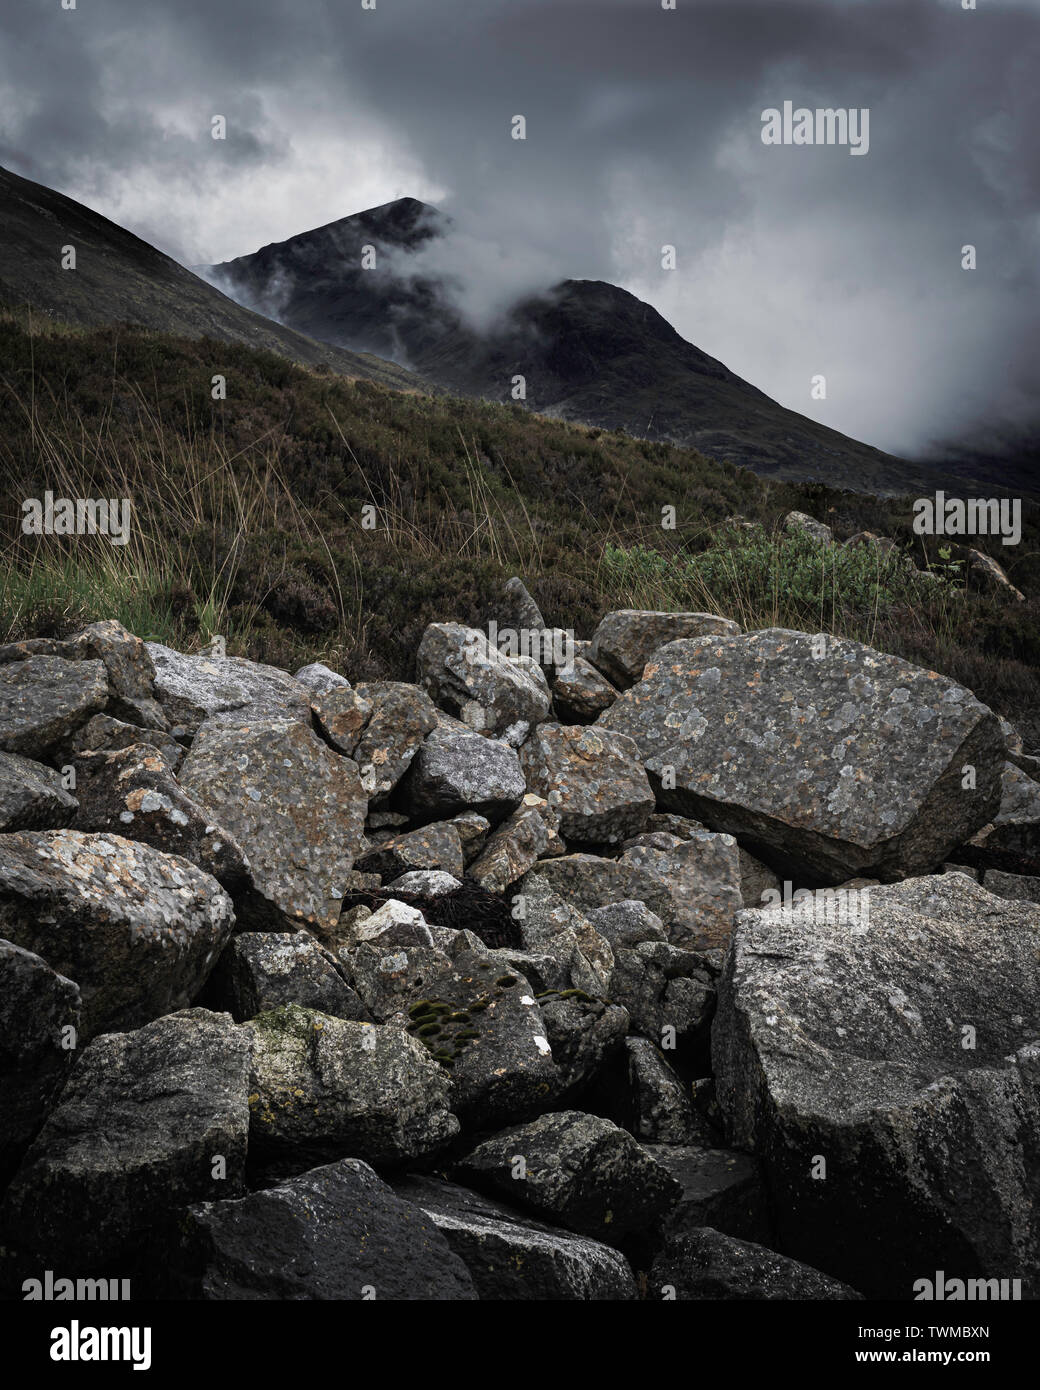 Clouds rolling over mountain peak and rocks in foreground.Dramatic landscape of Isle of Skye,Scotland.Dark nature image with atmospheric mood. Stock Photo